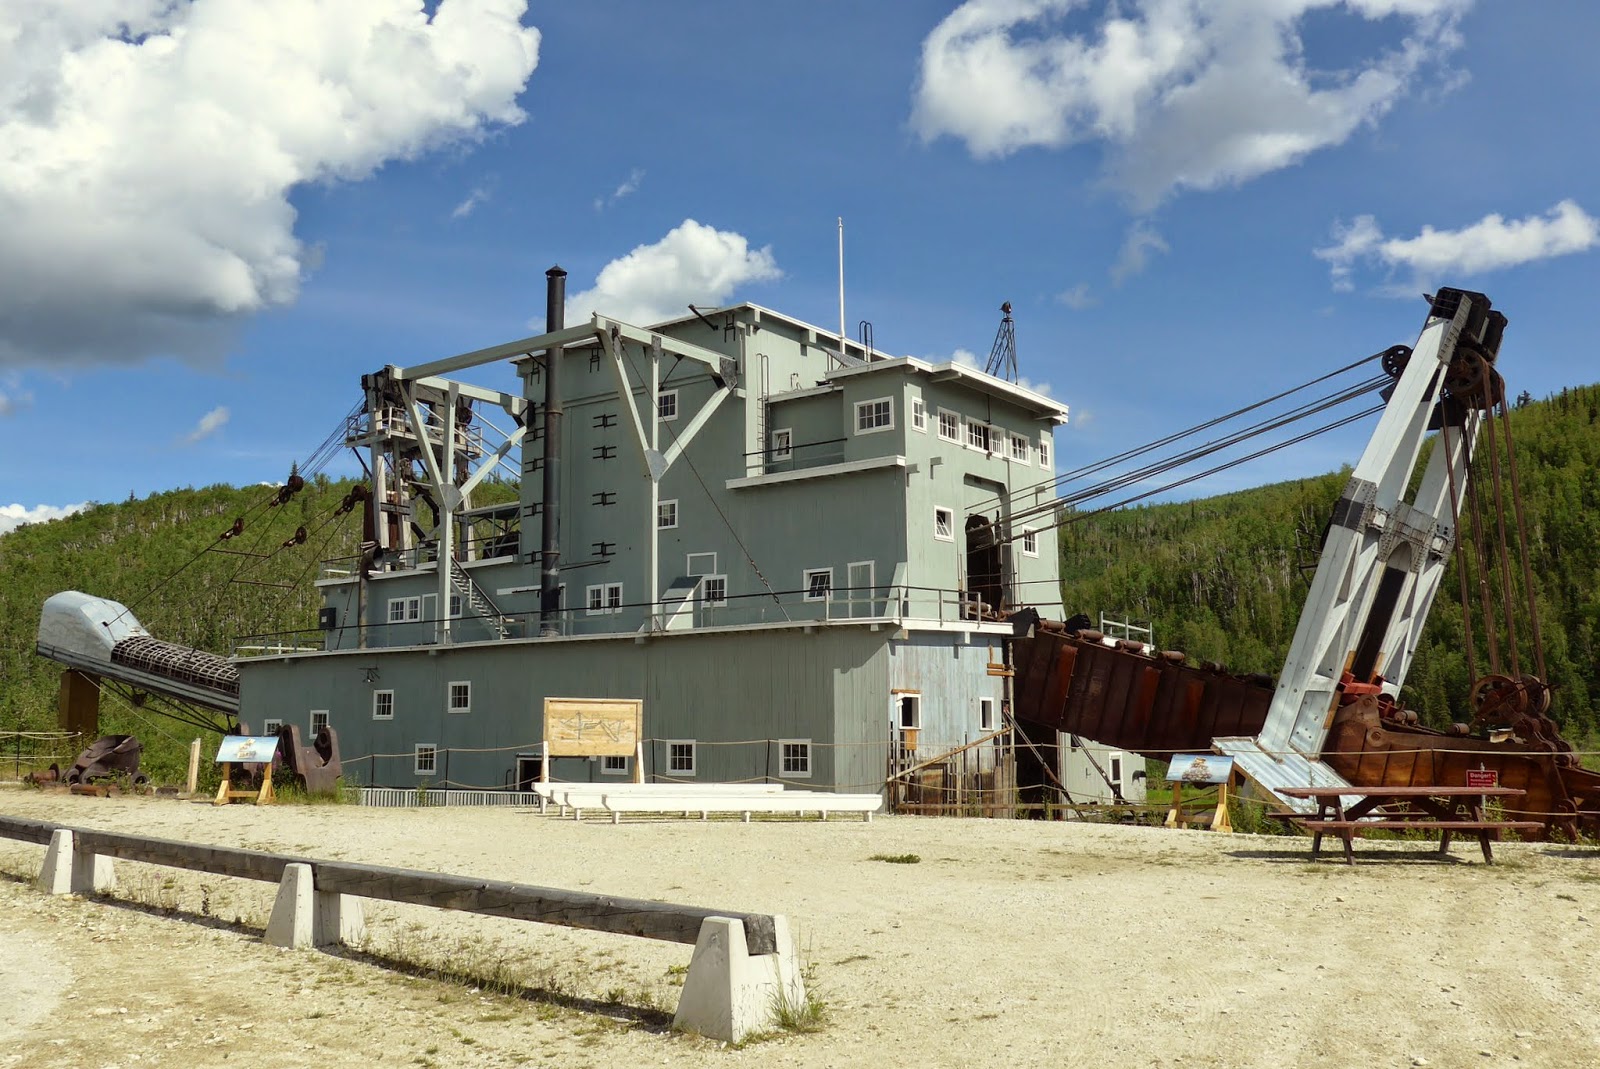 Dredge No 4, Canadian National Historic Site. It is massive.